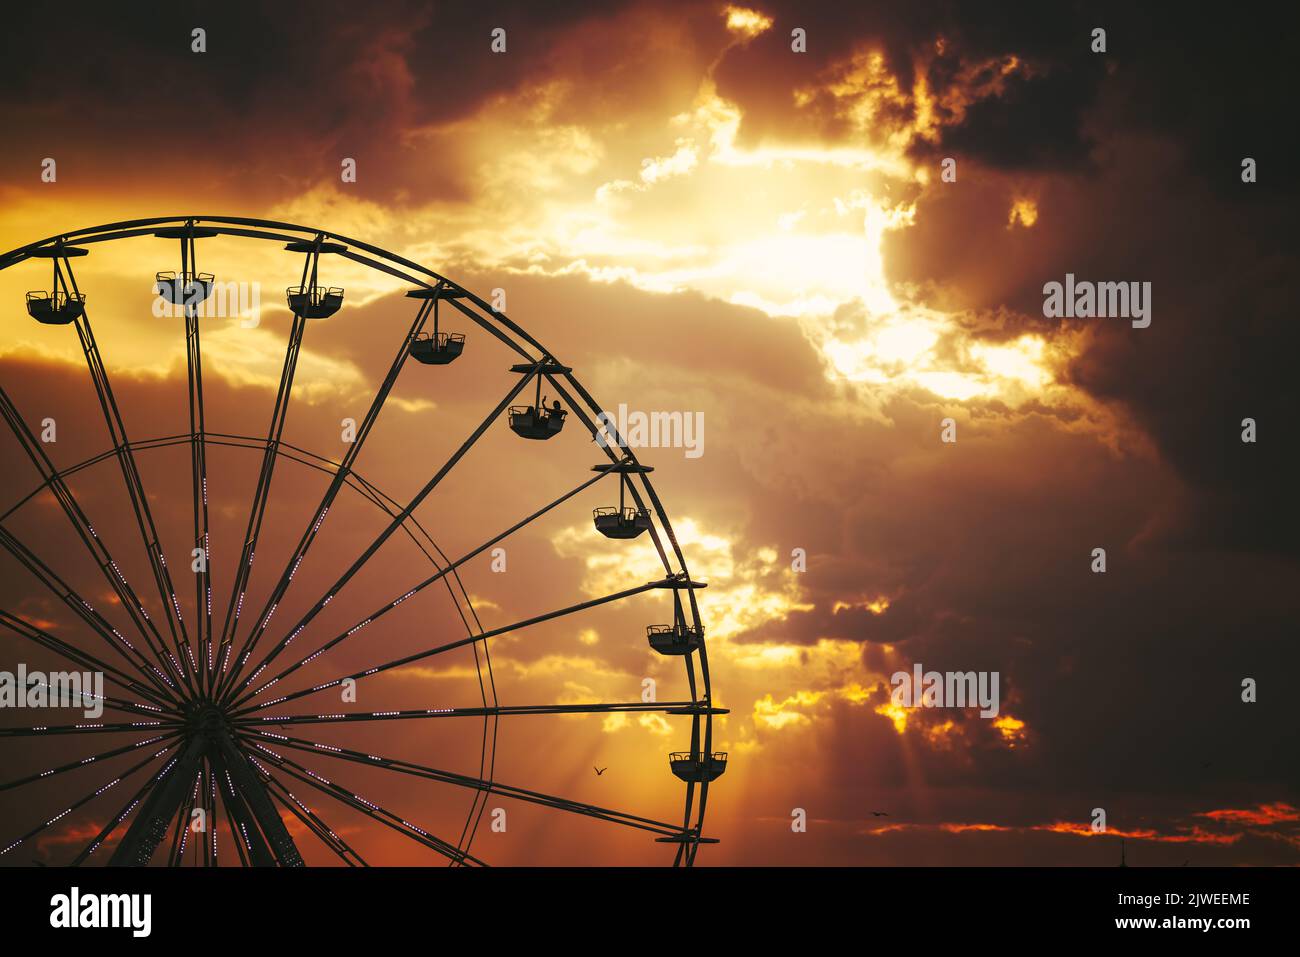 Ferris Wheel and illuminations in amusement park during scenic sunset with dramatic sky clouds and flying birds Stock Photo